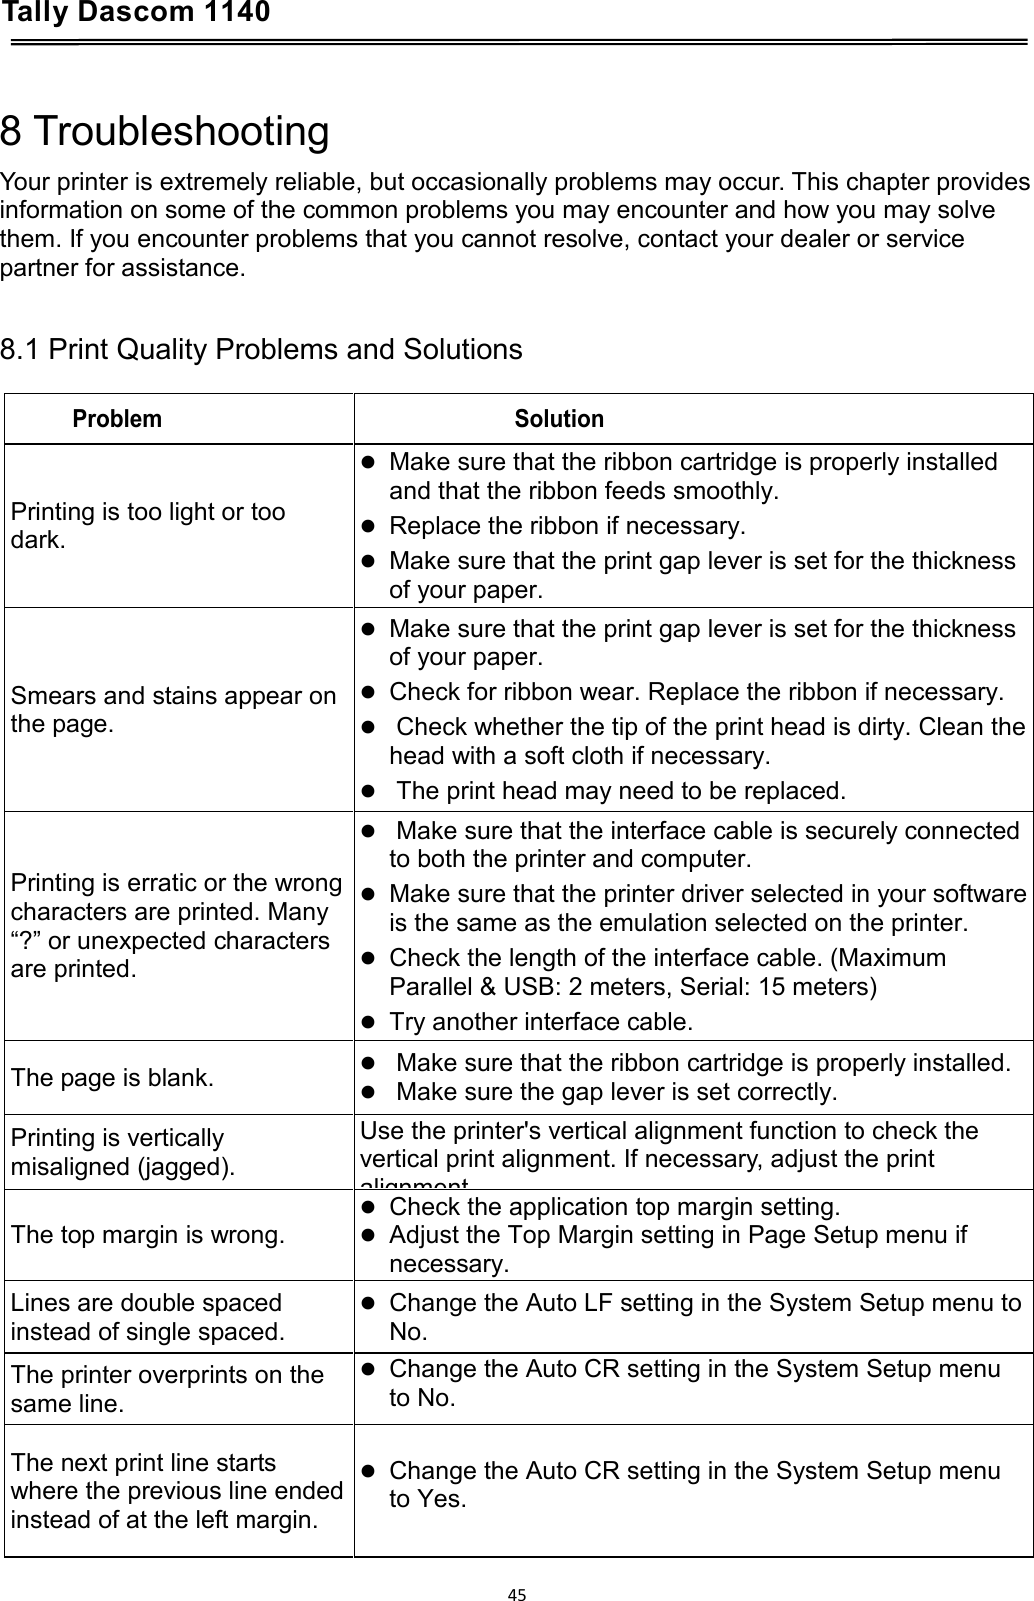 Tally Dascom 1140    8 Troubleshooting Your printer is extremely reliable, but occasionally problems may occur. This chapter provides information on some of the common problems you may encounter and how you may solve them. If you encounter problems that you cannot resolve, contact your dealer or service partner for assistance.  8.1 Print Quality Problems and Solutions  Problem Solution Printing is too light or too dark.  Make sure that the ribbon cartridge is properly installed and that the ribbon feeds smoothly.  Replace the ribbon if necessary.  Make sure that the print gap lever is set for the thickness of your paper. Smears and stains appear on the page.  Make sure that the print gap lever is set for the thickness of your paper.  Check for ribbon wear. Replace the ribbon if necessary.   Check whether the tip of the print head is dirty. Clean the head with a soft cloth if necessary.   The print head may need to be replaced. Printing is erratic or the wrong characters are printed. Many “?” or unexpected characters are printed.   Make sure that the interface cable is securely connected to both the printer and computer.  Make sure that the printer driver selected in your software is the same as the emulation selected on the printer.  Check the length of the interface cable. (Maximum Parallel &amp; USB: 2 meters, Serial: 15 meters)  Try another interface cable. The page is blank.   Make sure that the ribbon cartridge is properly installed.   Make sure the gap lever is set correctly. Printing is vertically misaligned (jagged). Use the printer&apos;s vertical alignment function to check the vertical print alignment. If necessary, adjust the print alignment  The top margin is wrong.  Check the application top margin setting.  Adjust the Top Margin setting in Page Setup menu if necessary. Lines are double spaced instead of single spaced.  Change the Auto LF setting in the System Setup menu to No. The printer overprints on the same line.  Change the Auto CR setting in the System Setup menu to No. The next print line starts where the previous line ended instead of at the left margin.  Change the Auto CR setting in the System Setup menu to Yes. 45  